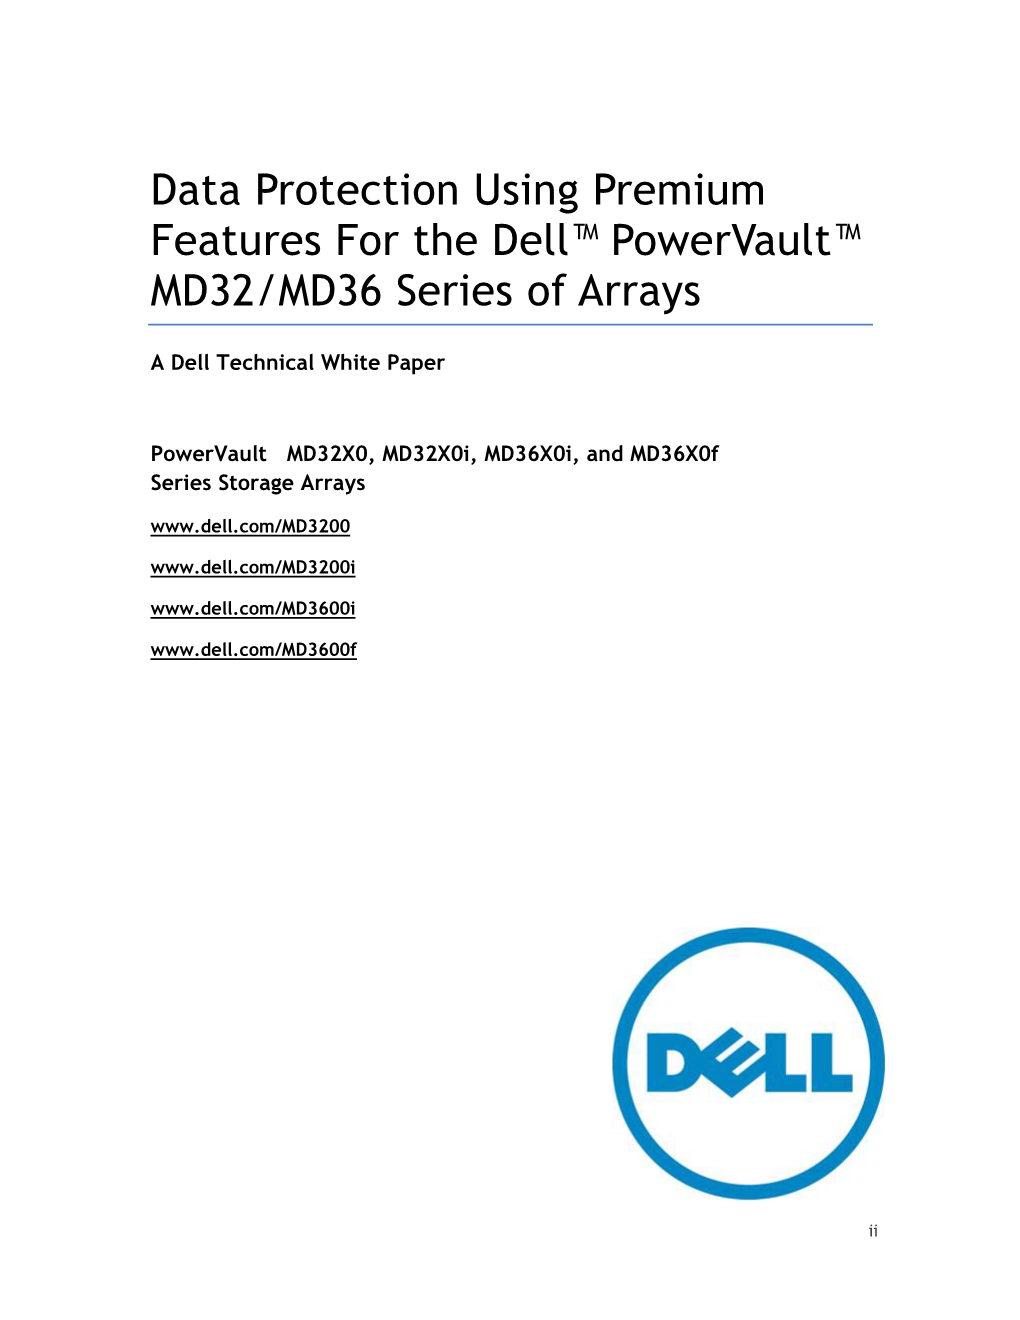 Data Protection on Powervault MD 32/36 Arrays Using Premium Features